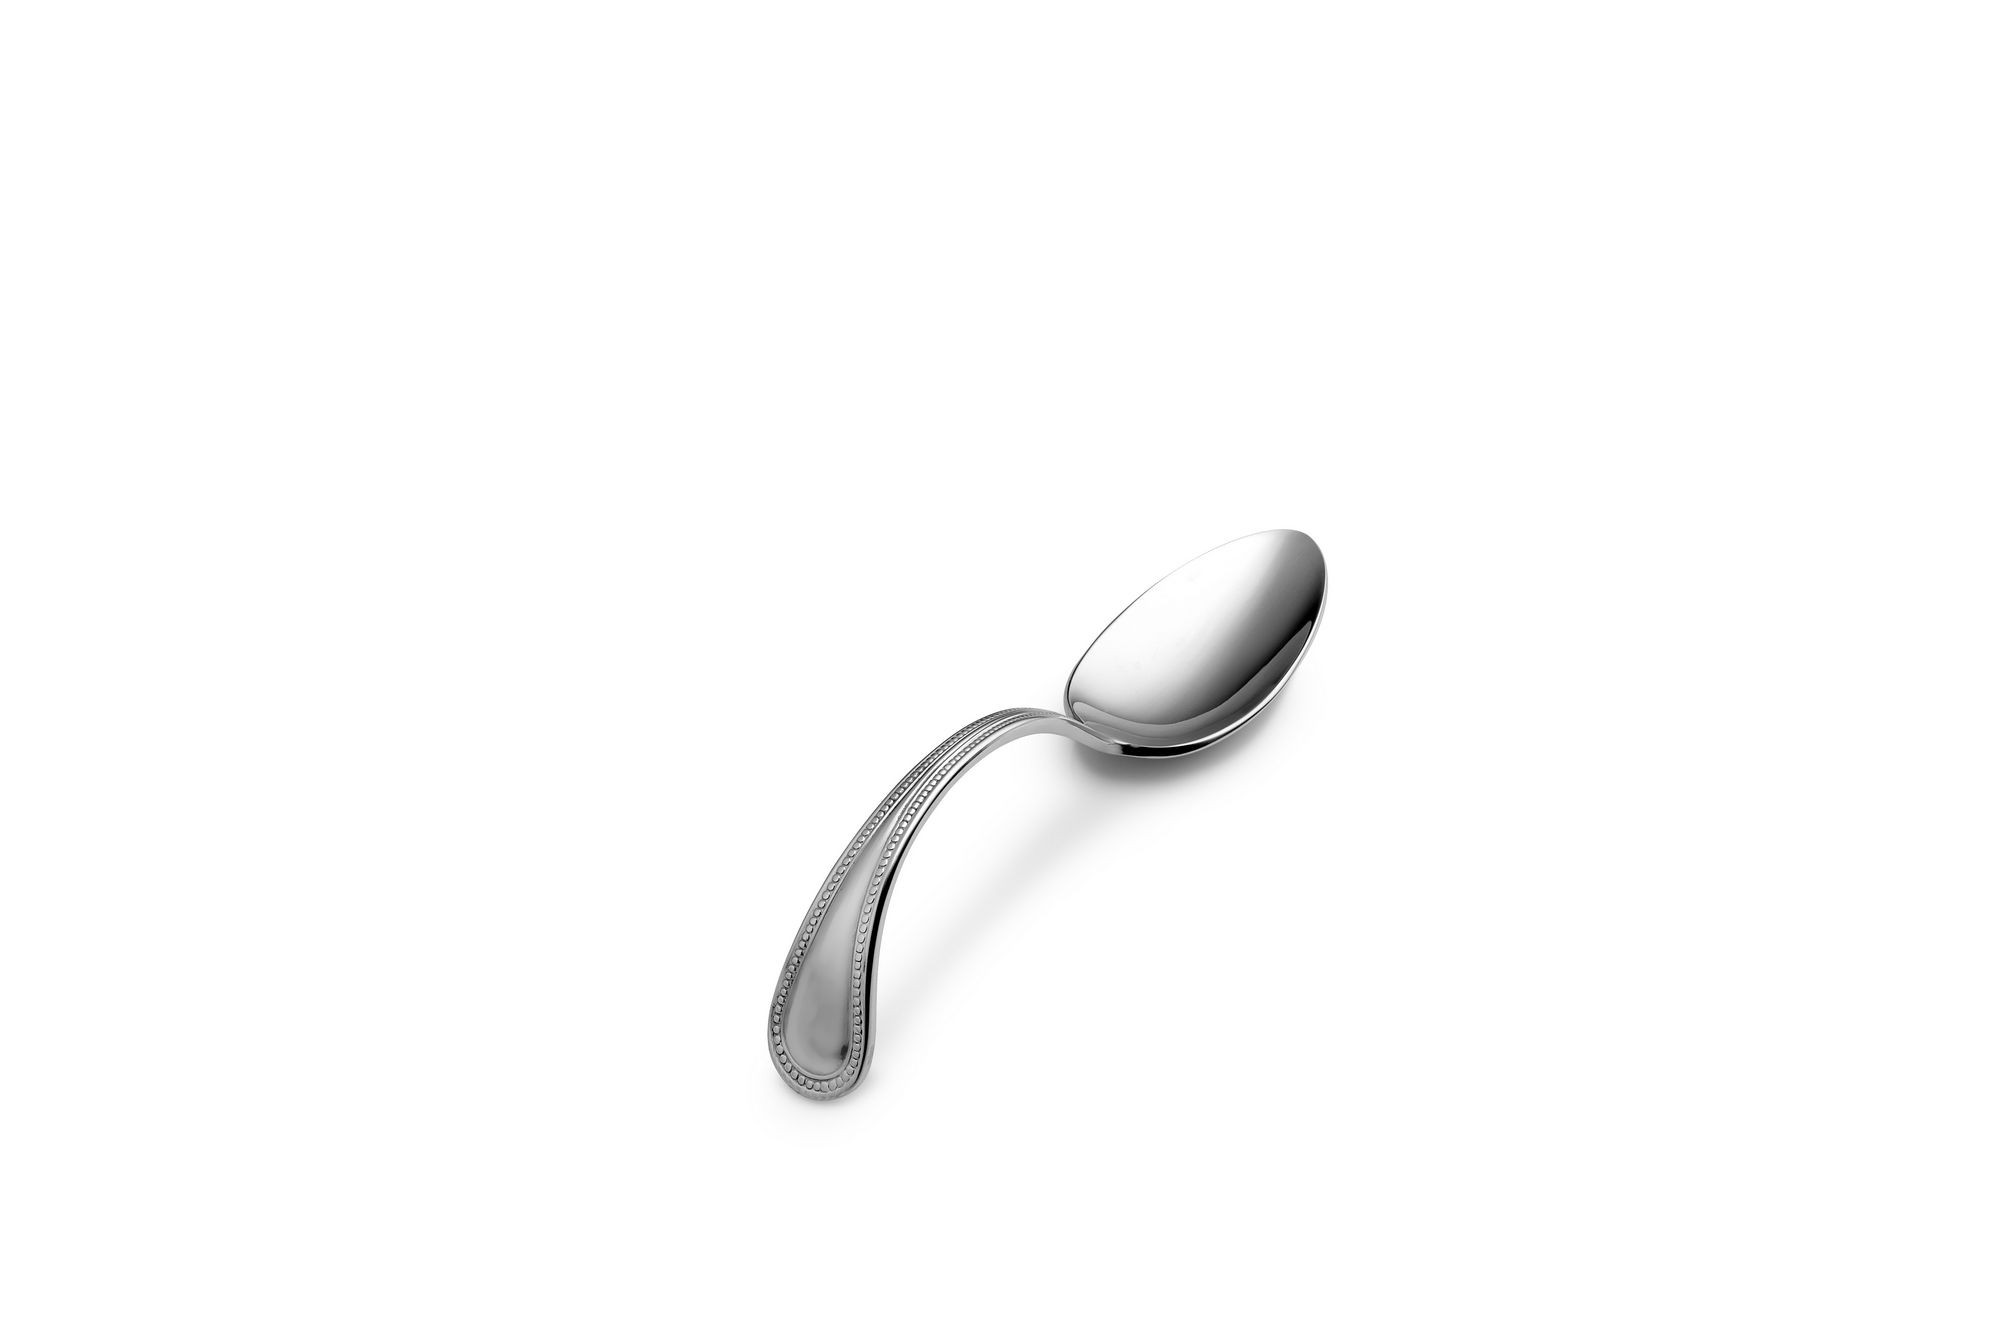 Bon Chef STS1003 Sombrero Soup and Dessert Tasting Spoon